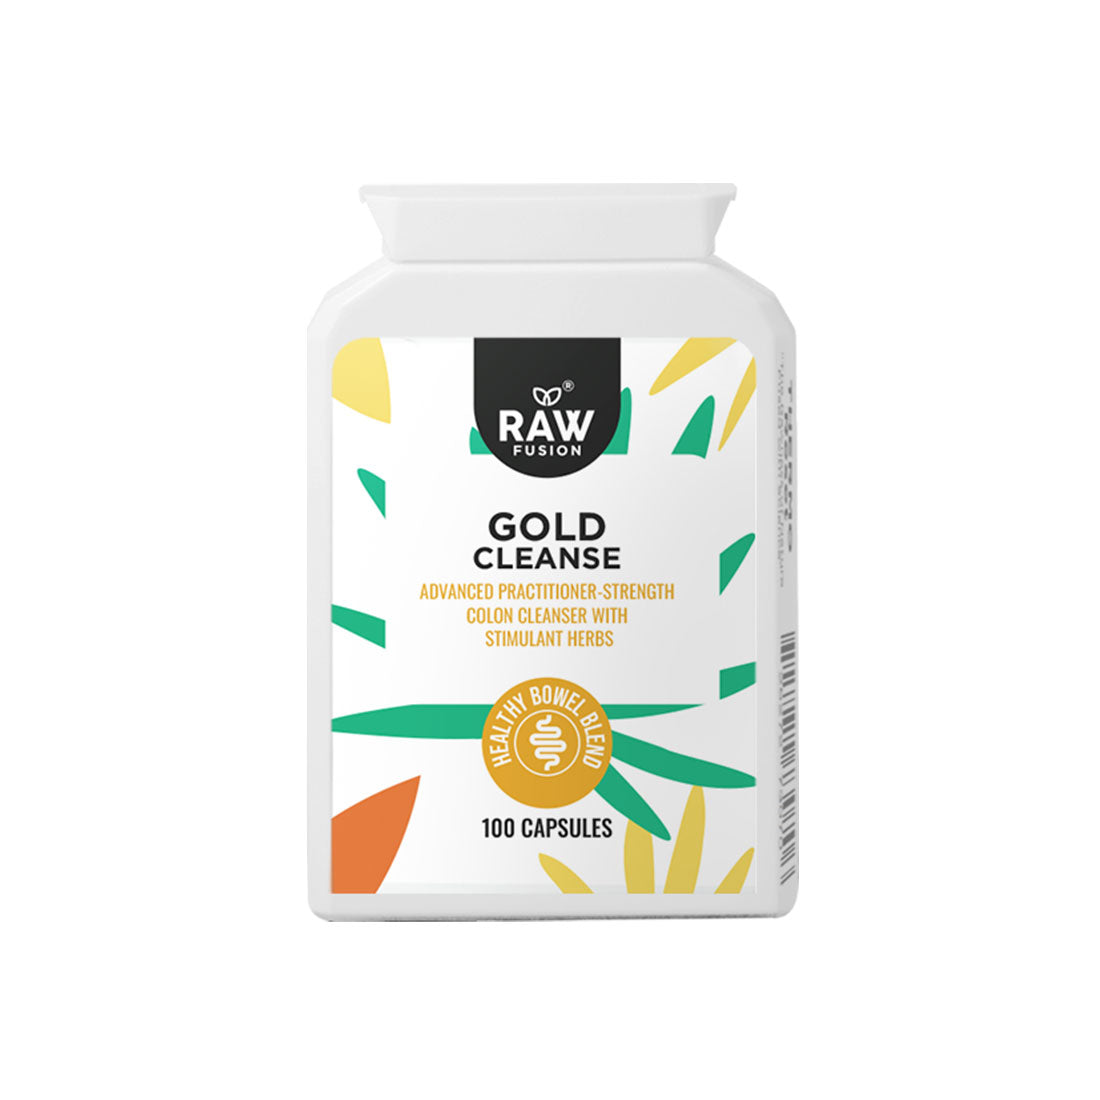 GOLD Cleanse